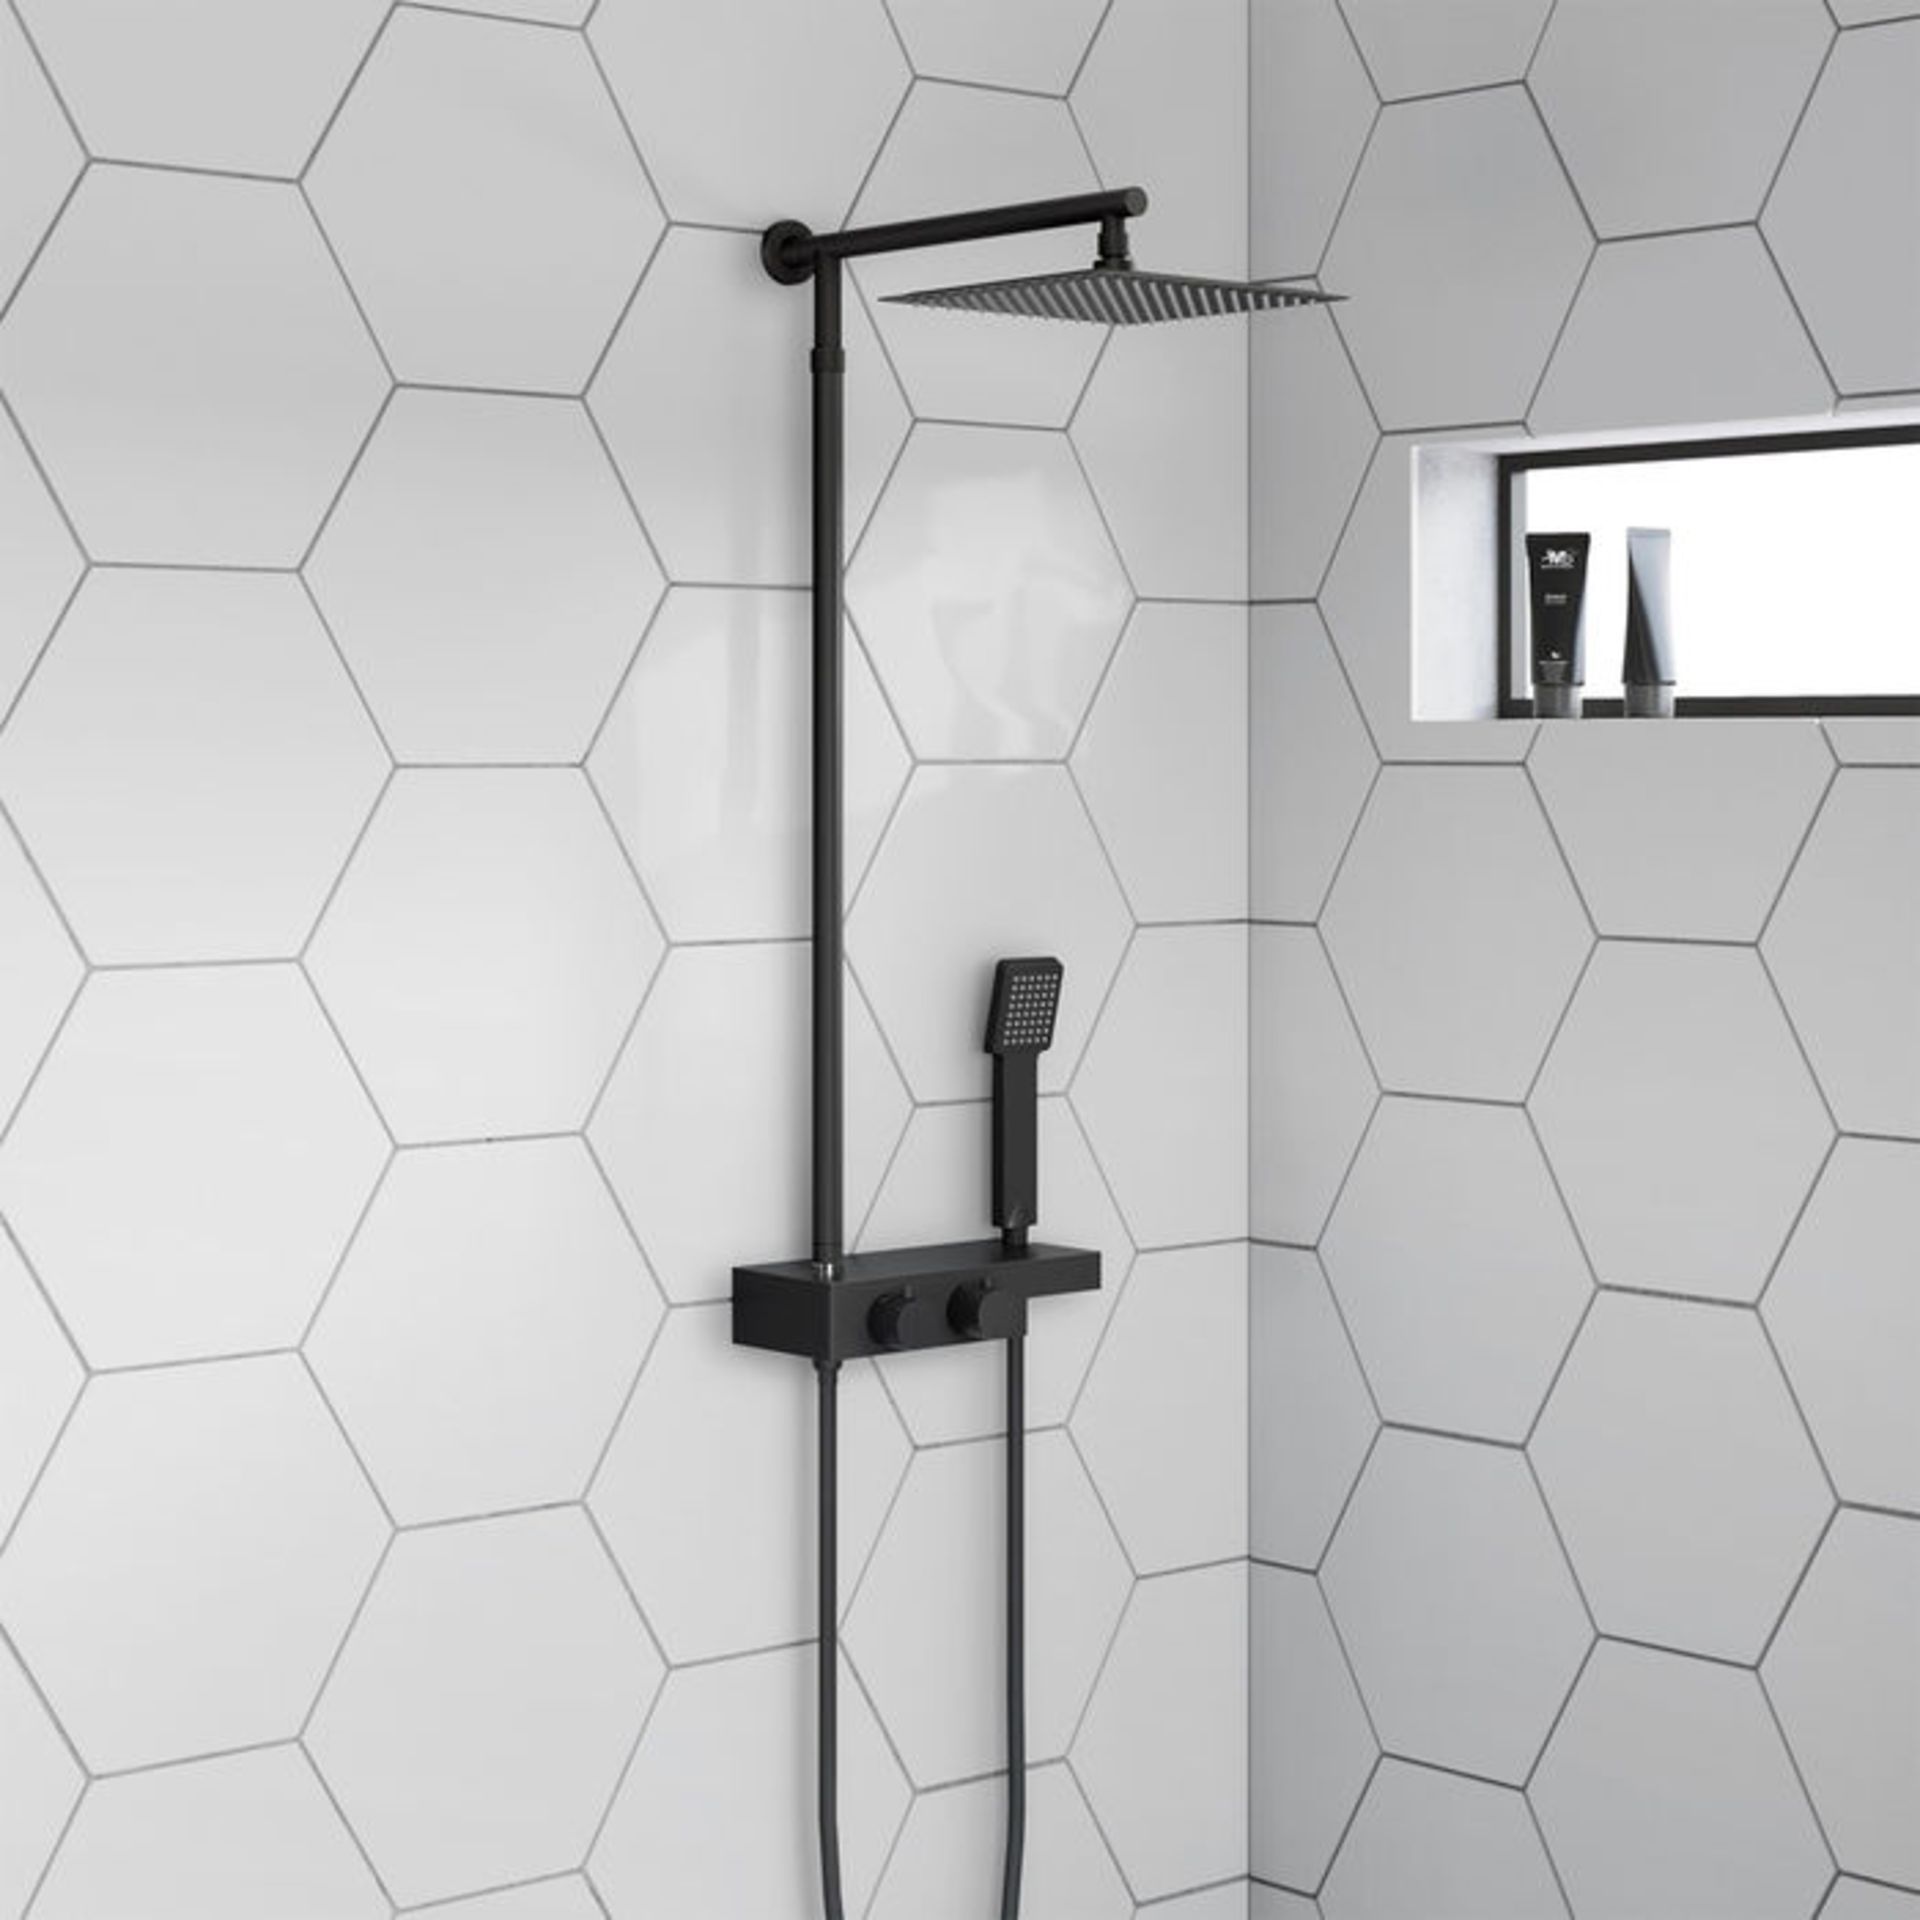 NEW & BOXDED Matte Black Square Thermostatic Mixer Shower Kit & Shelf. RRP £599.99.SP5102BLK ... - Image 2 of 3